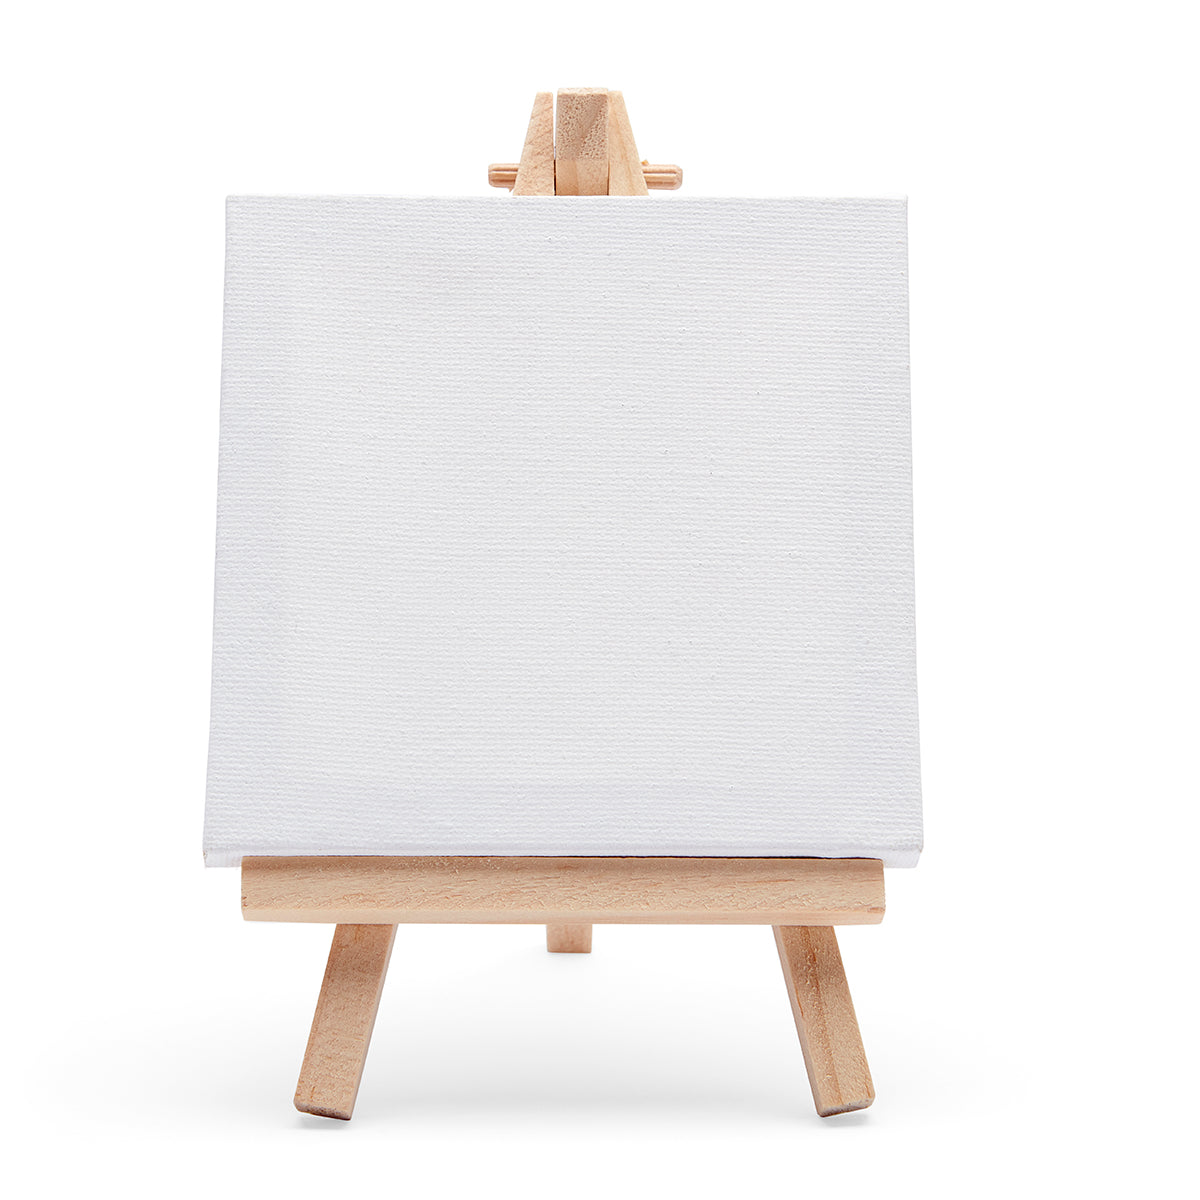 3 x 3 Stretched Canvas with 5 Mini Wood Display Easel Kit, 12 Pack